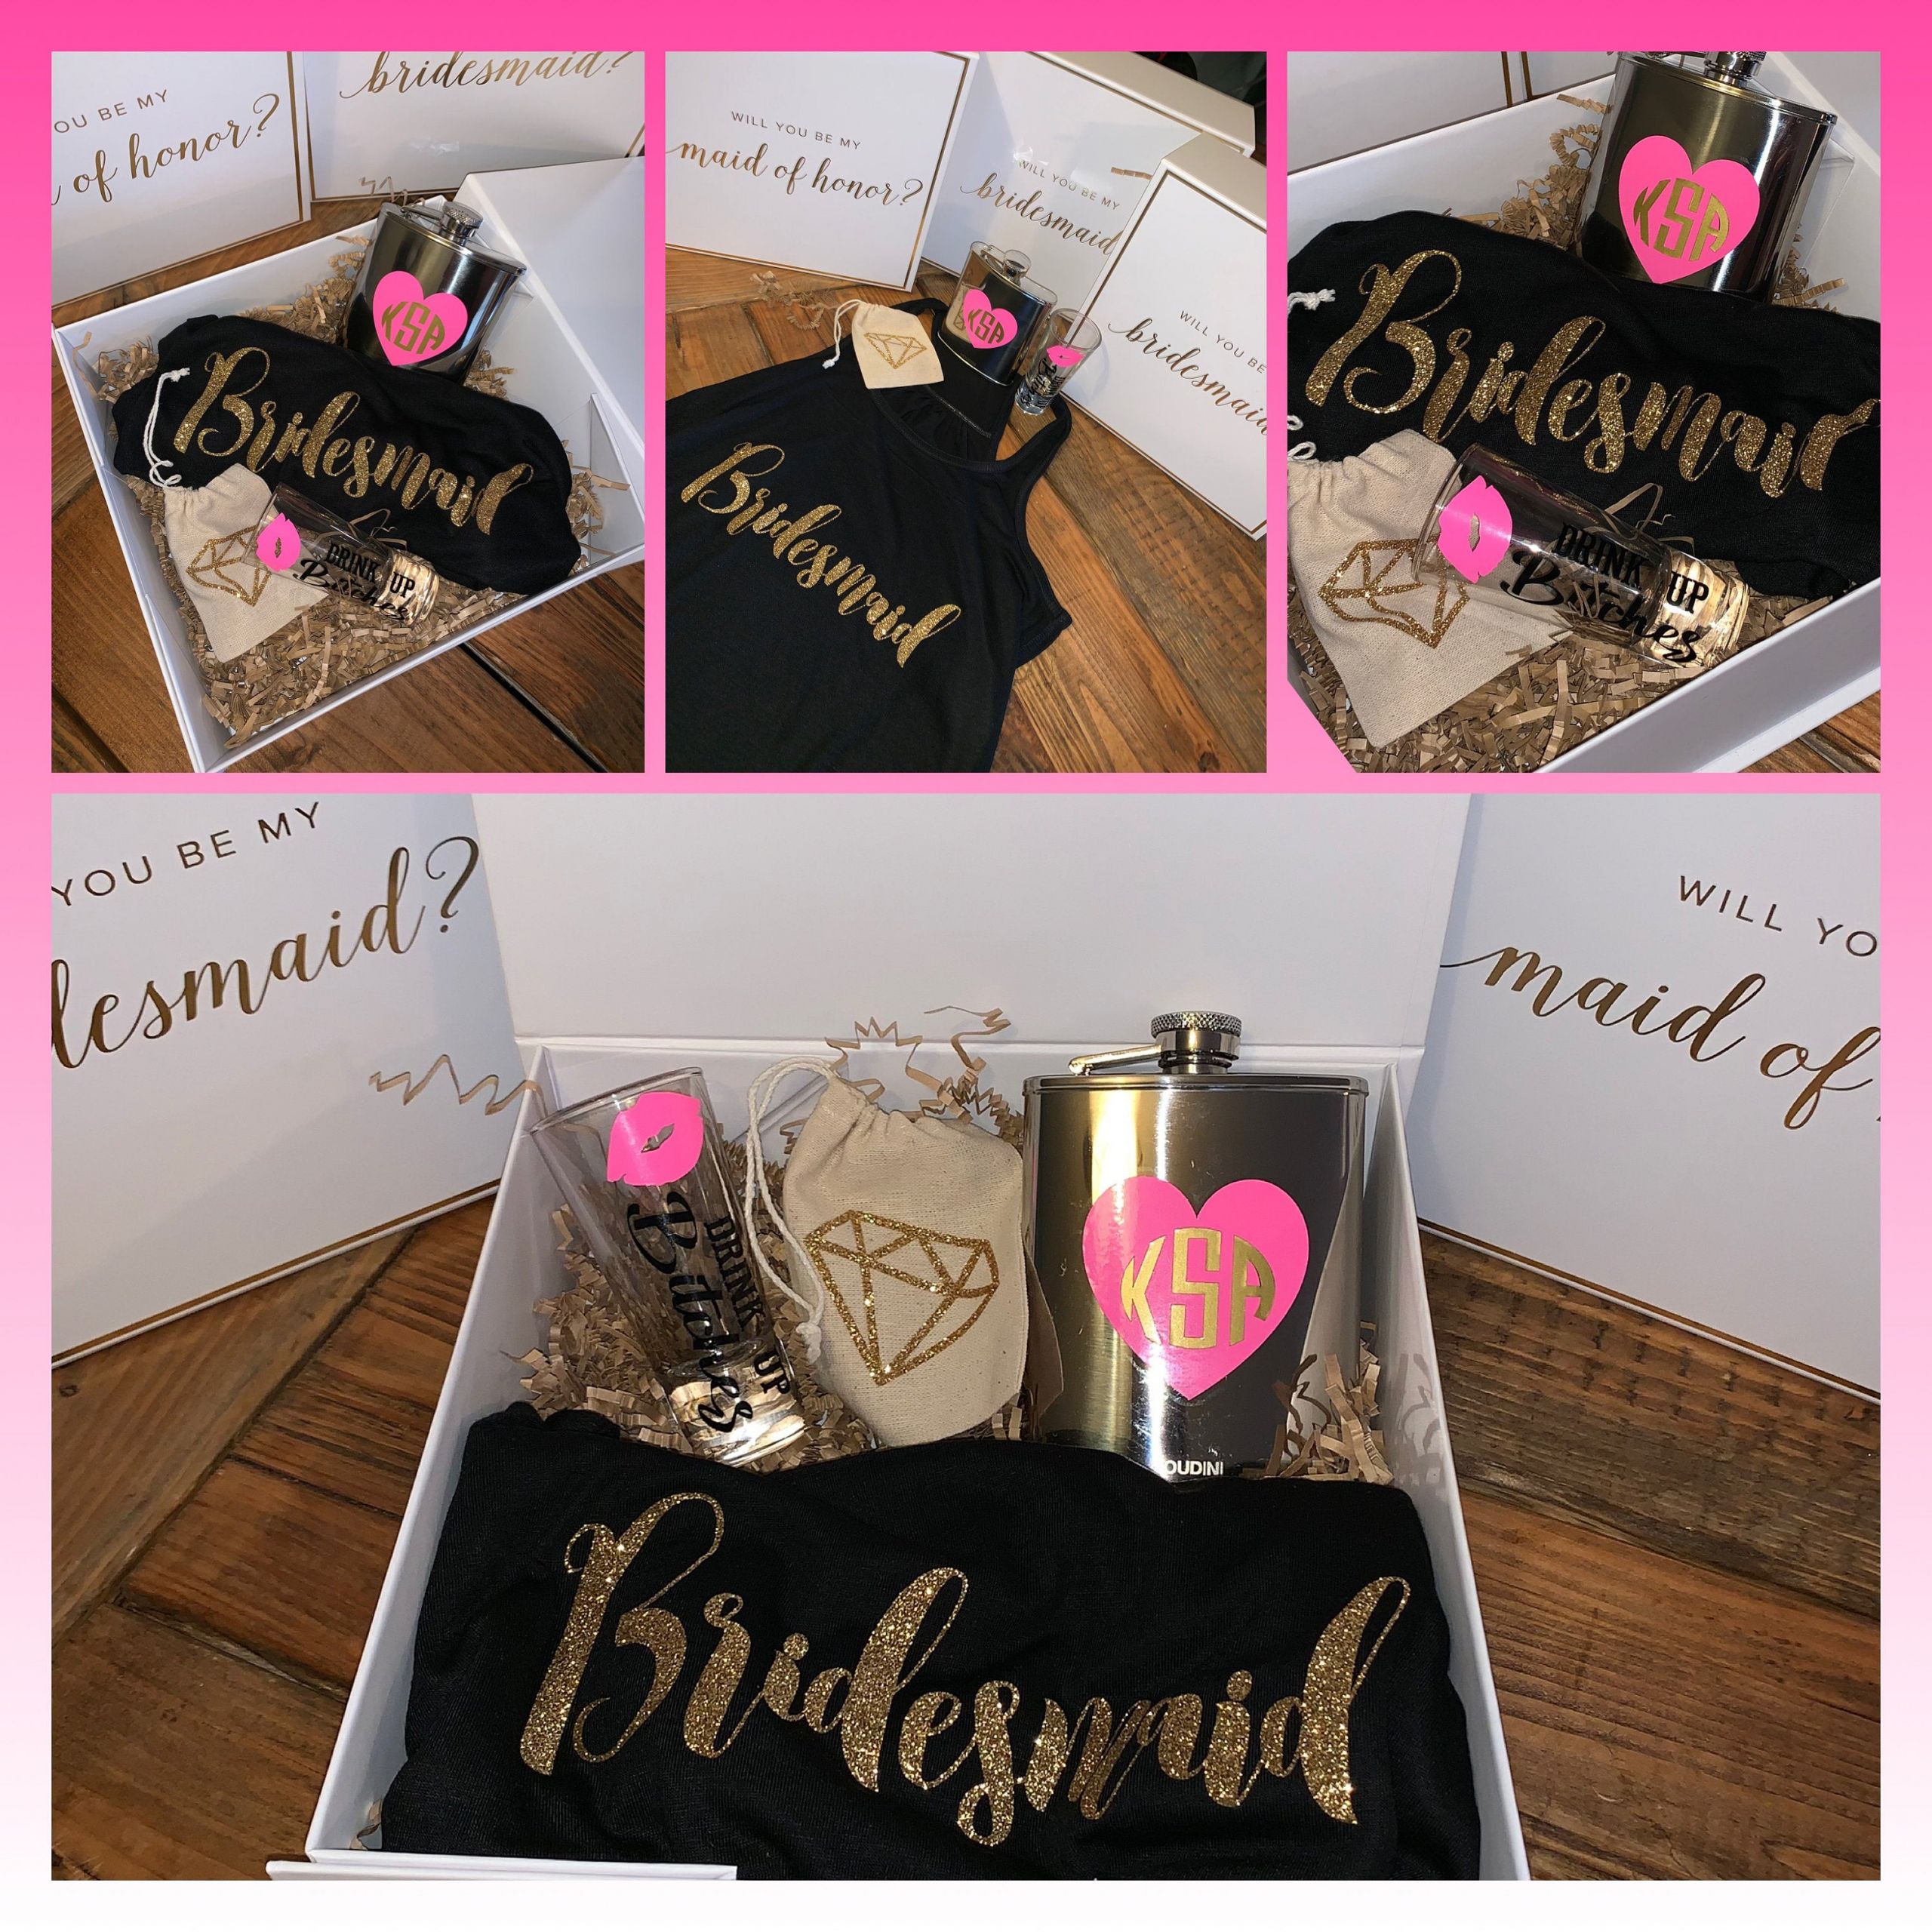 Engagement Party Gift Ideas From Maid Of Honor
 Proposal Gift Boxes Bridesmaid Proposal Box Will You Be